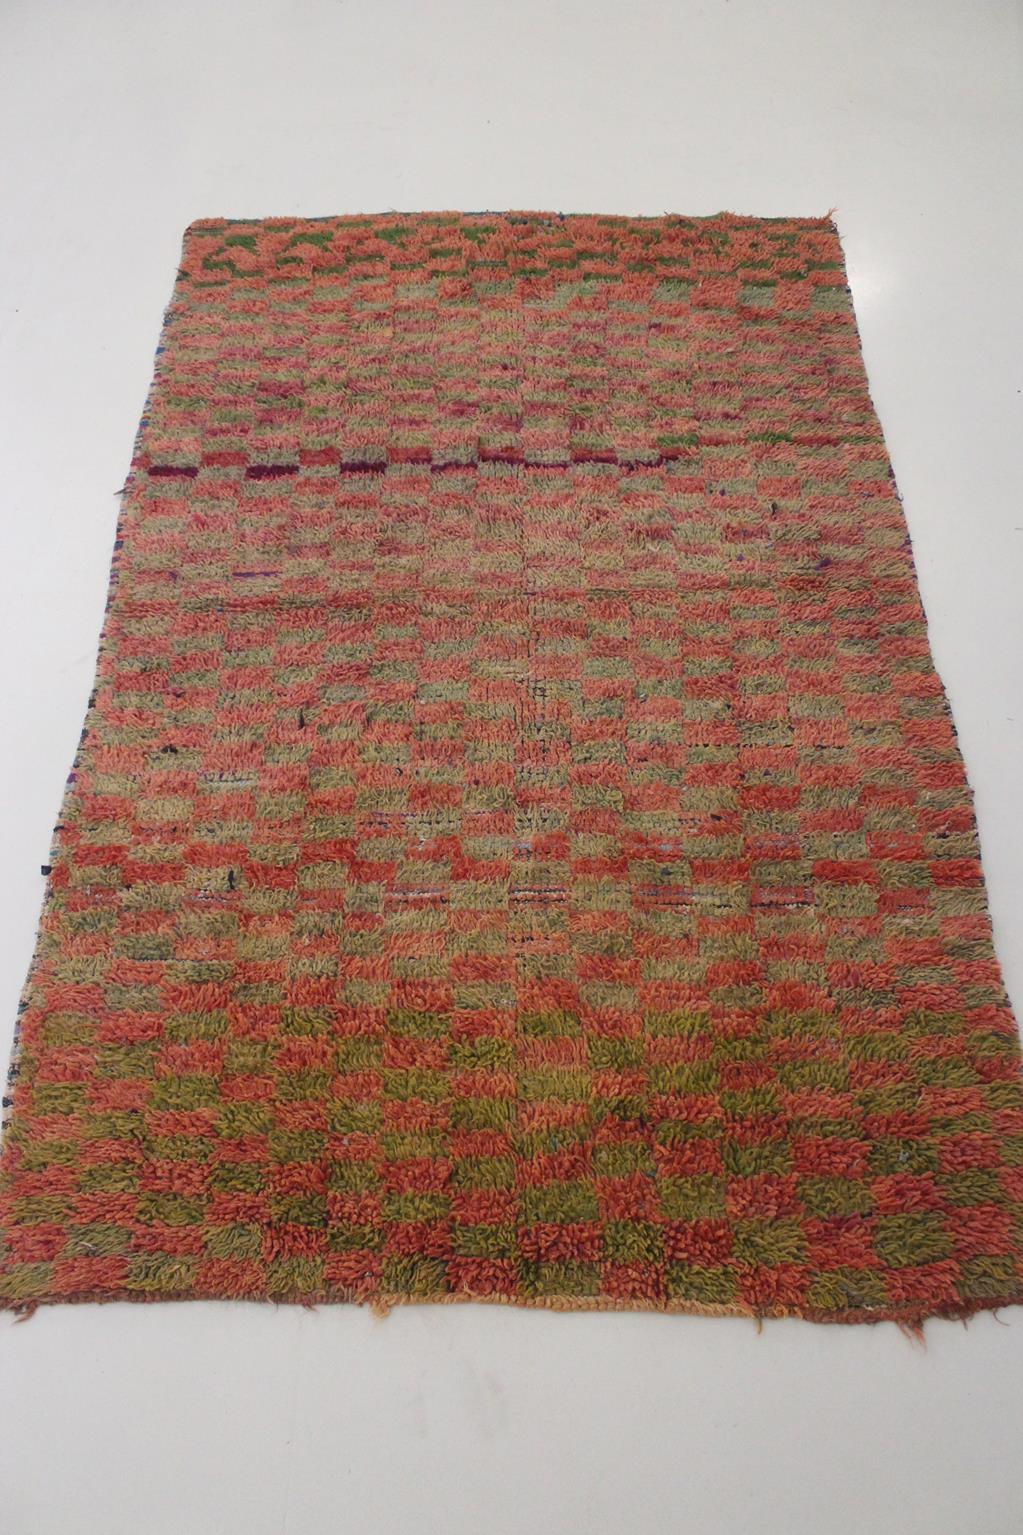 Hand-Woven Vintage Moroccan Boujad rug - Pink/green - 5.2x8.5feet / 160x260cm For Sale